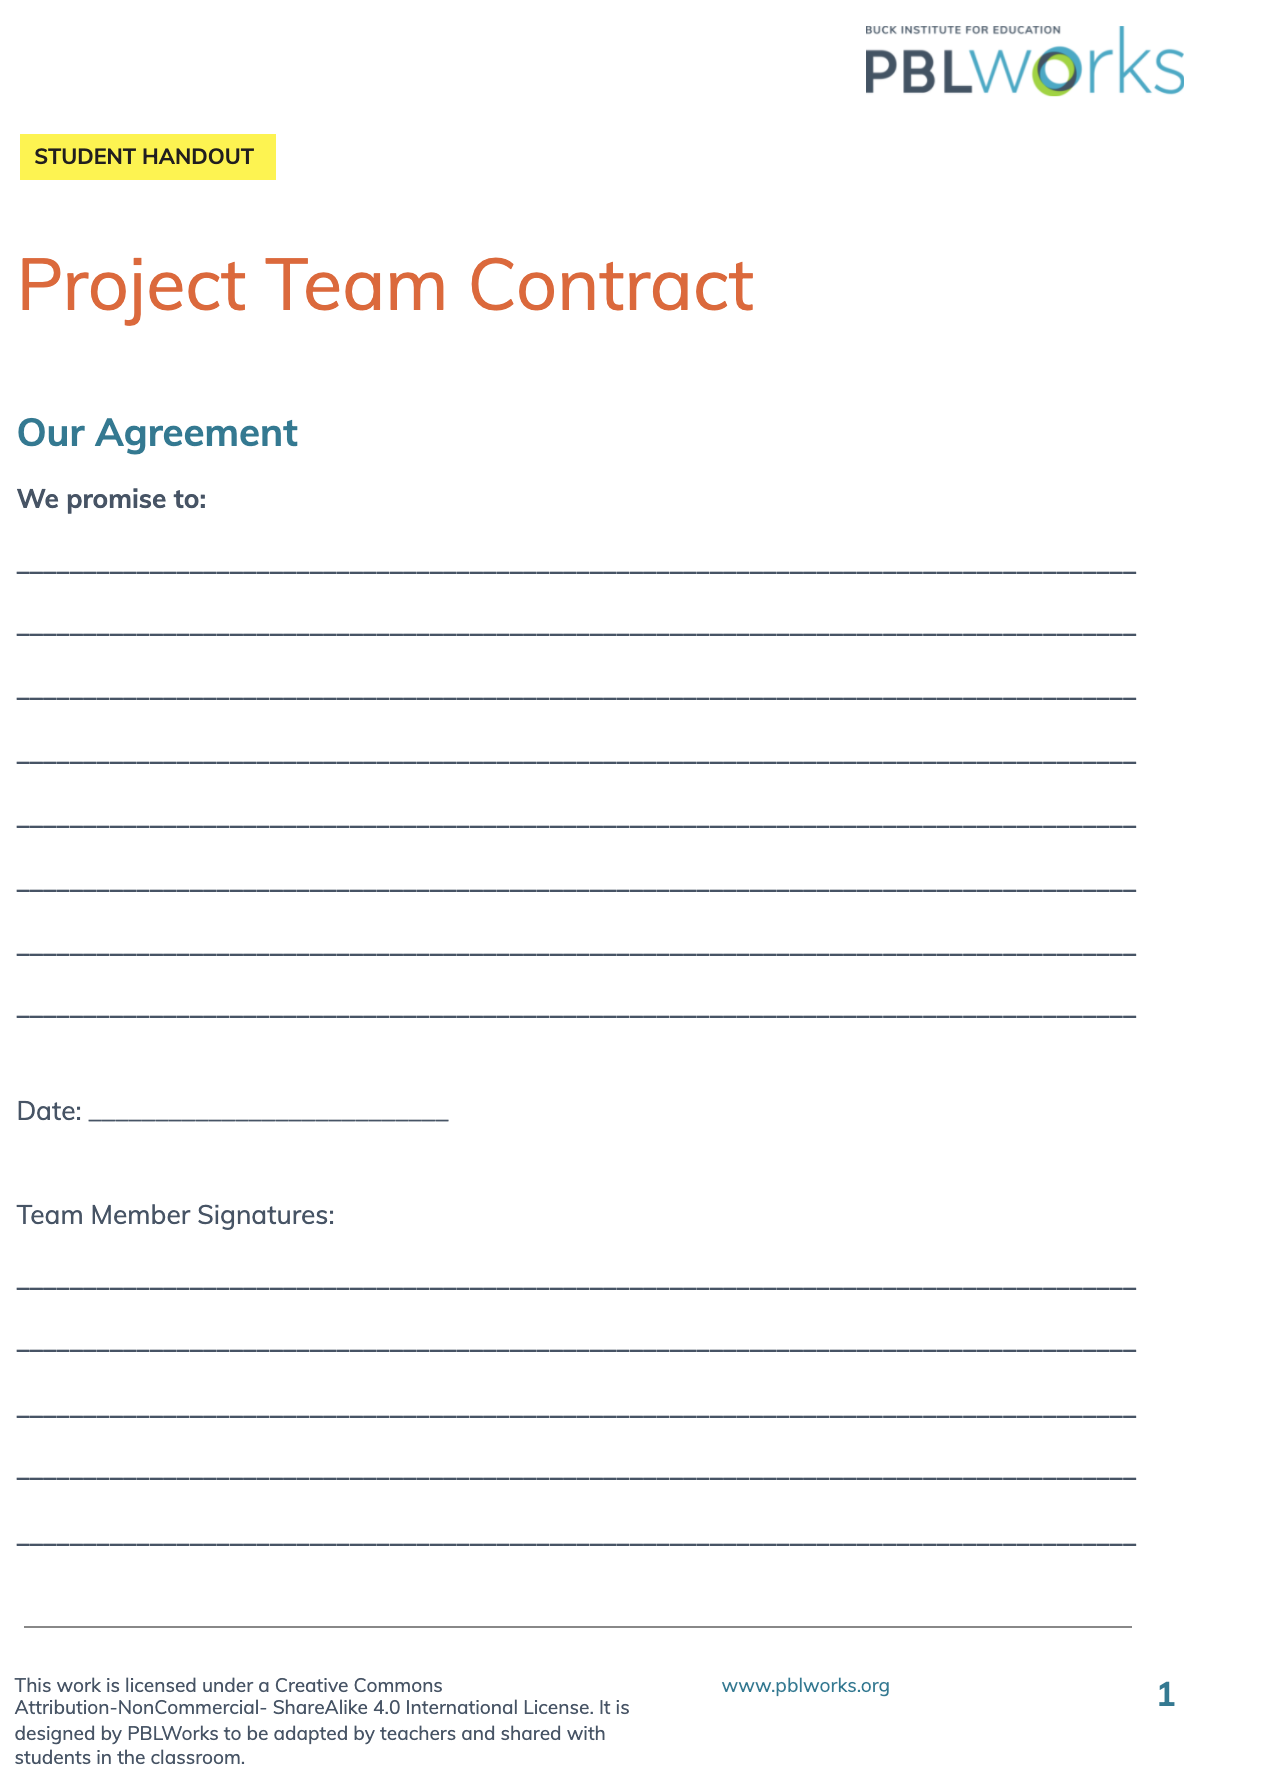 group-agreement-contract